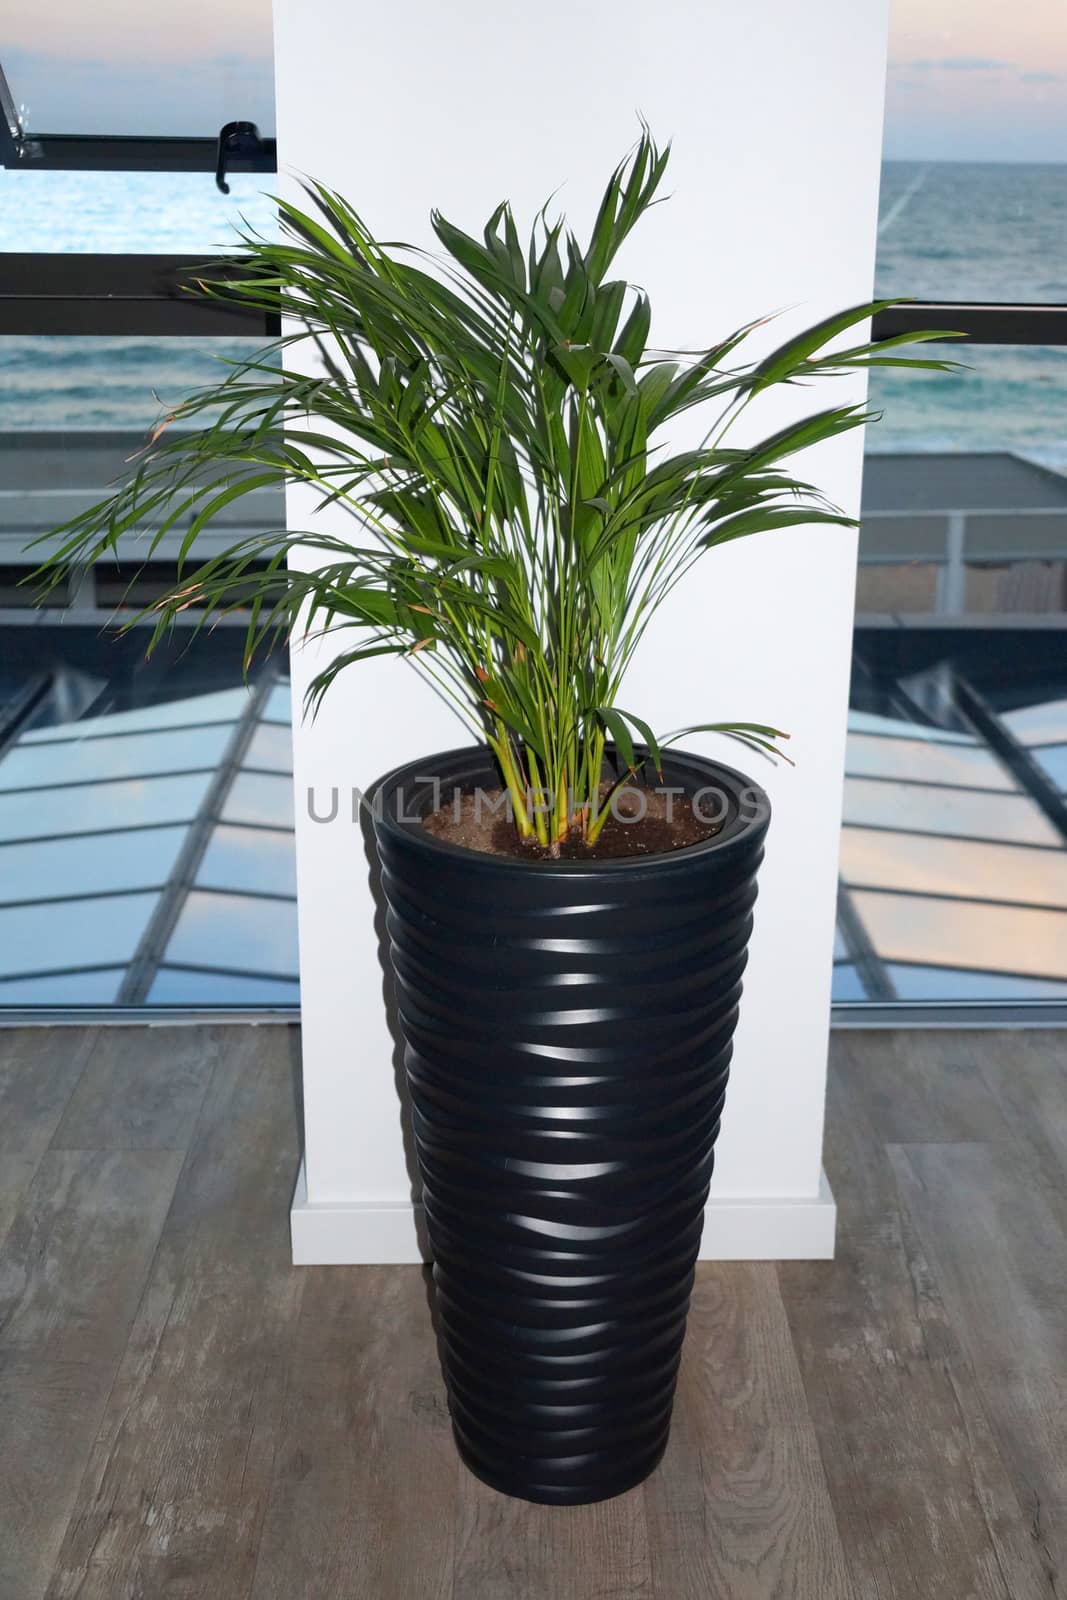 green palm tree in a black floor planter in the interior.